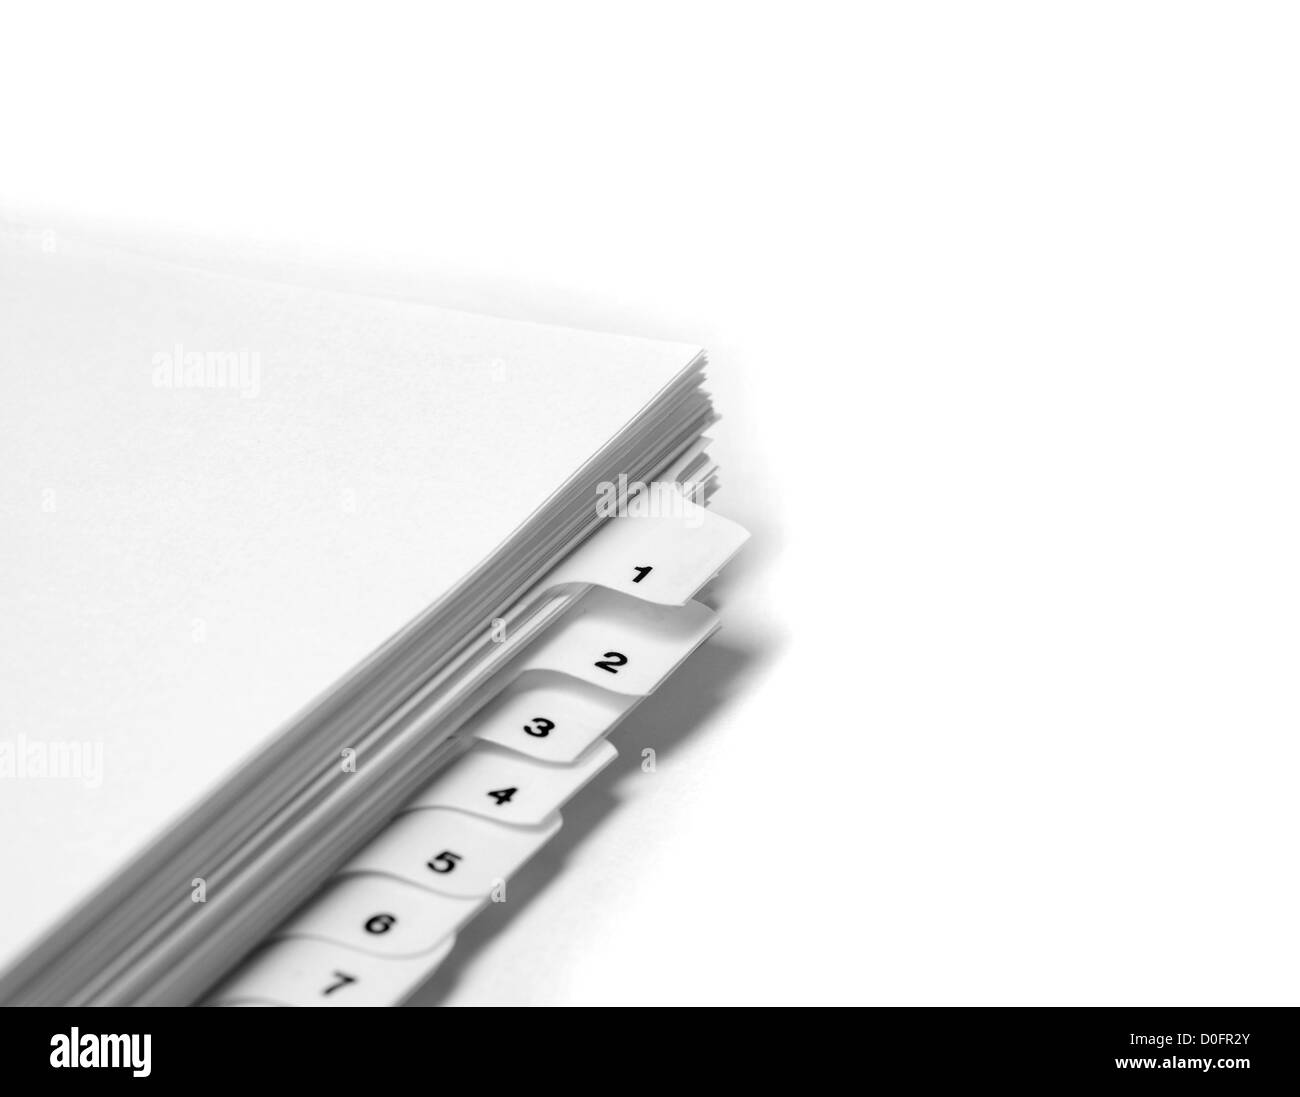 Several blank file tabs on white background Stock Photo